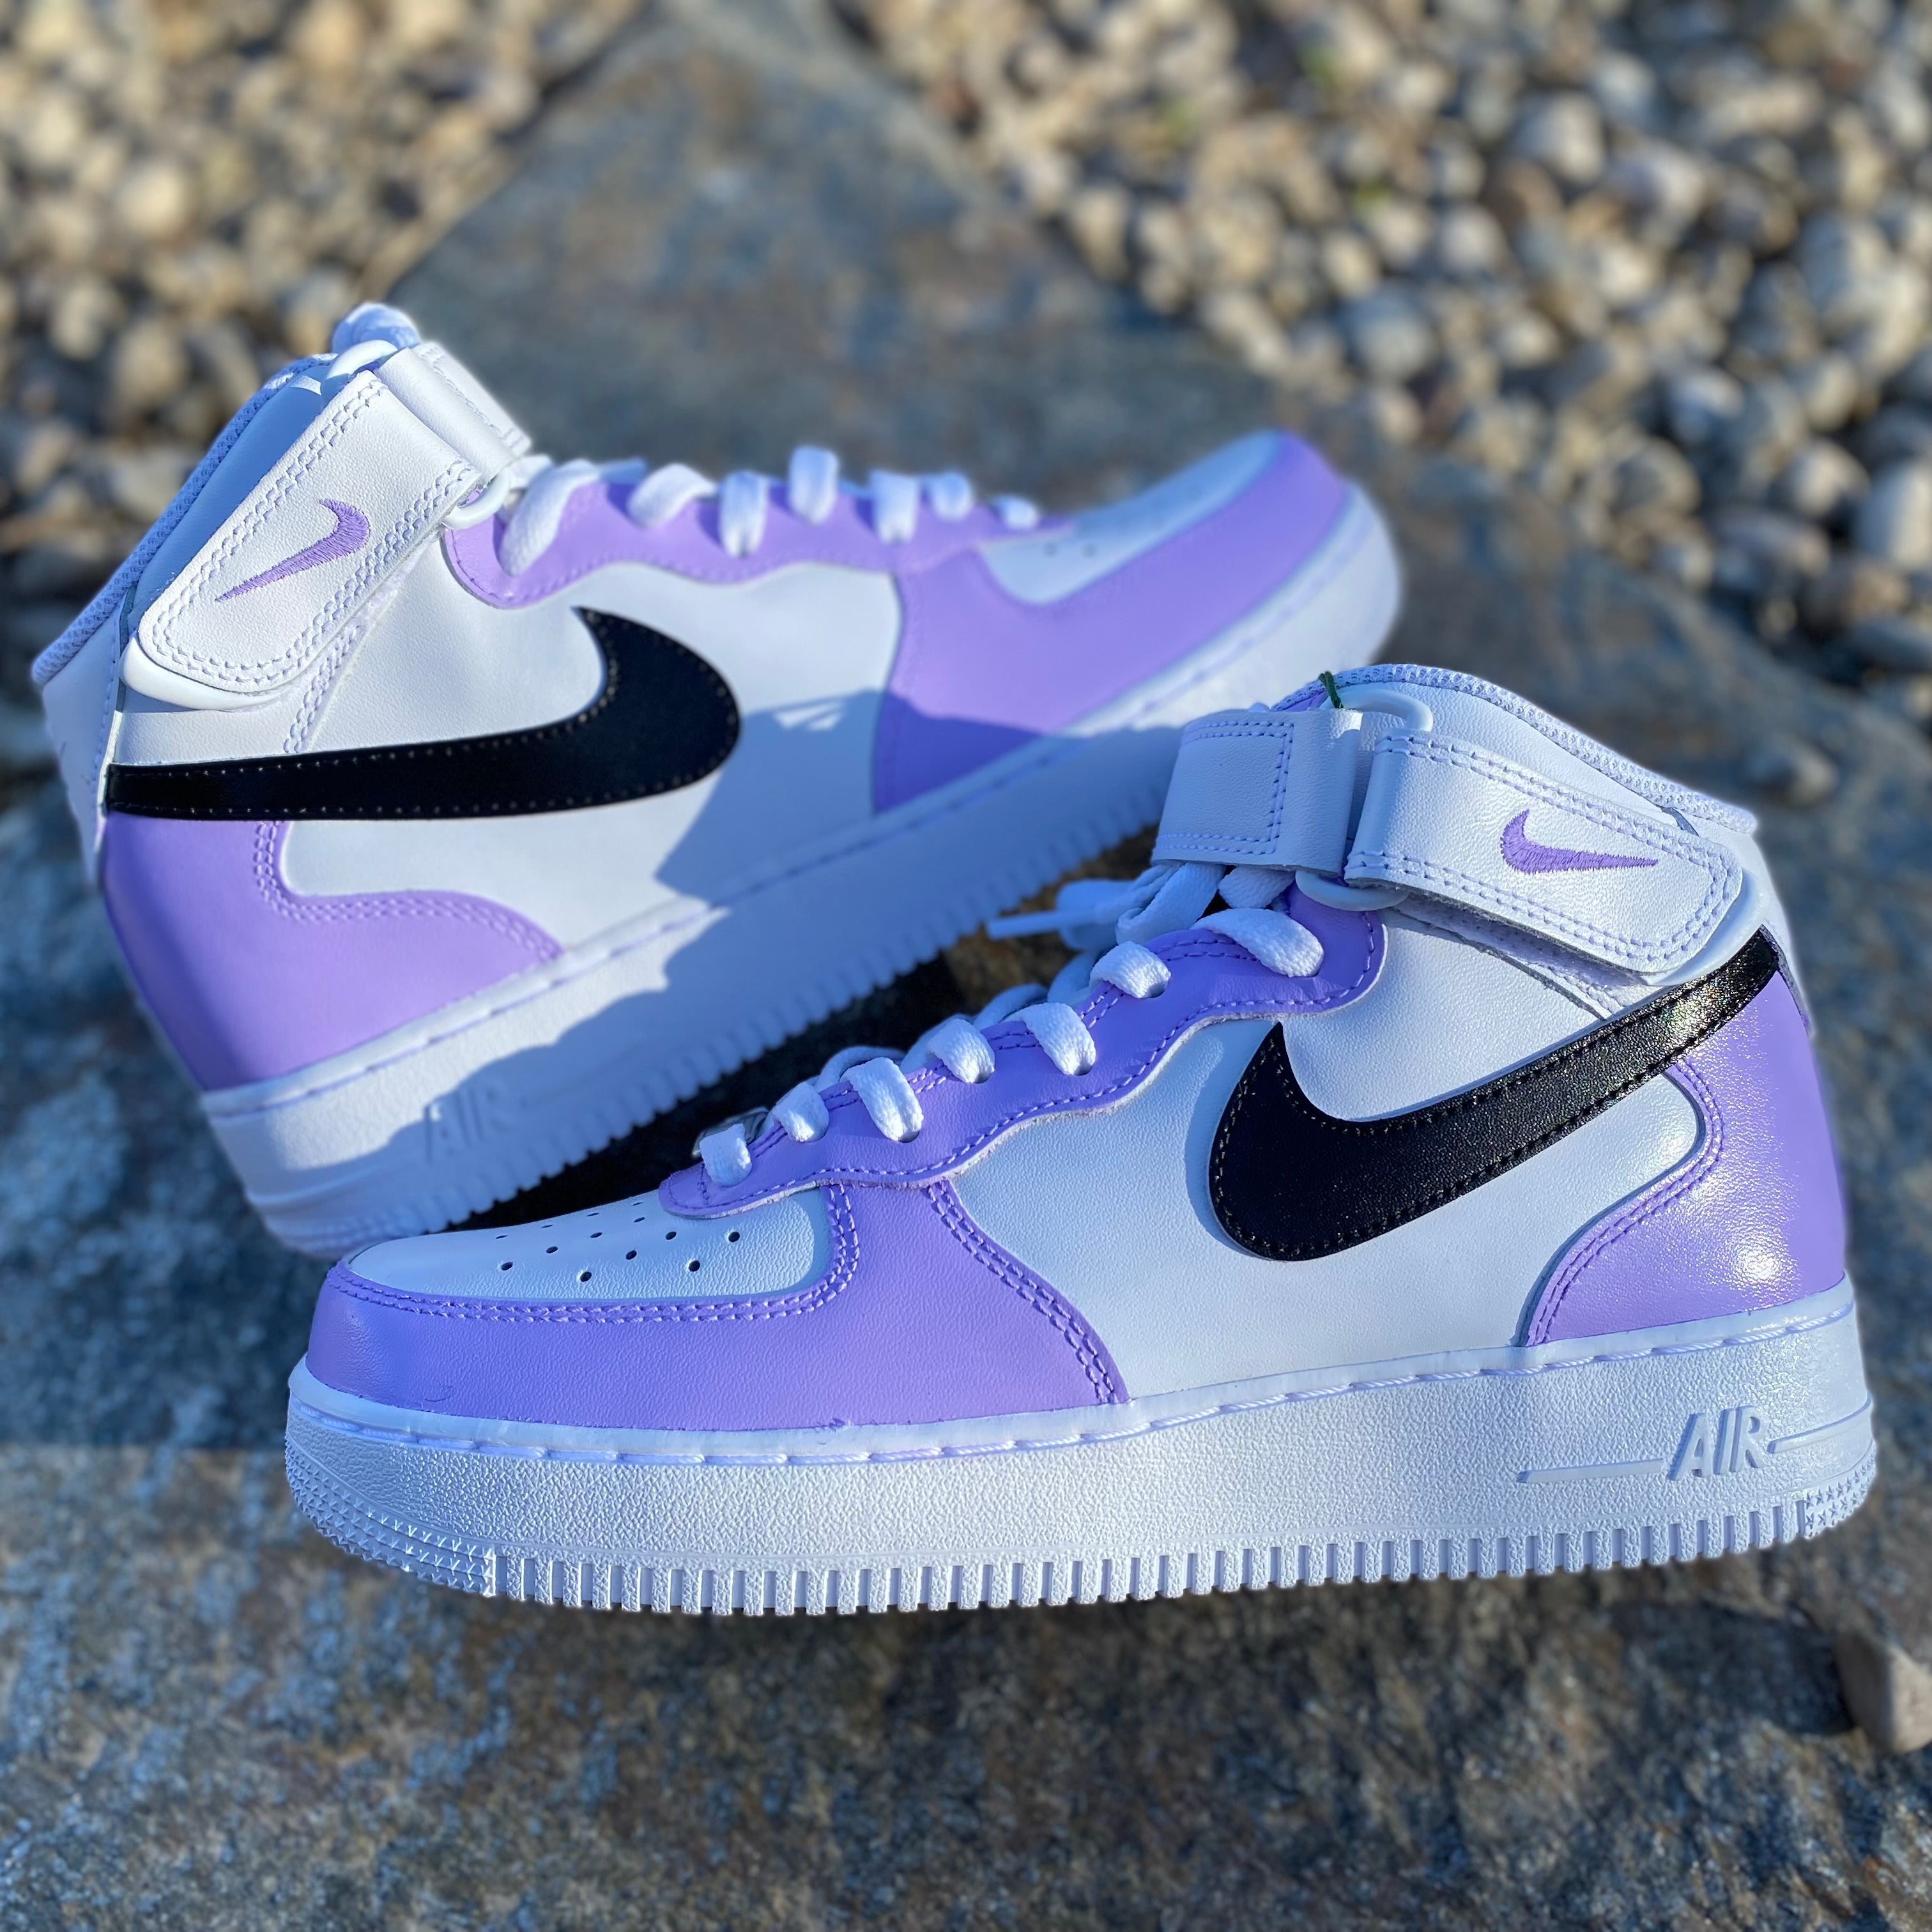 Nike Air Force 1 Custom Sneakers Mid Two Tone Lilac Purple Lavender White  Shoes